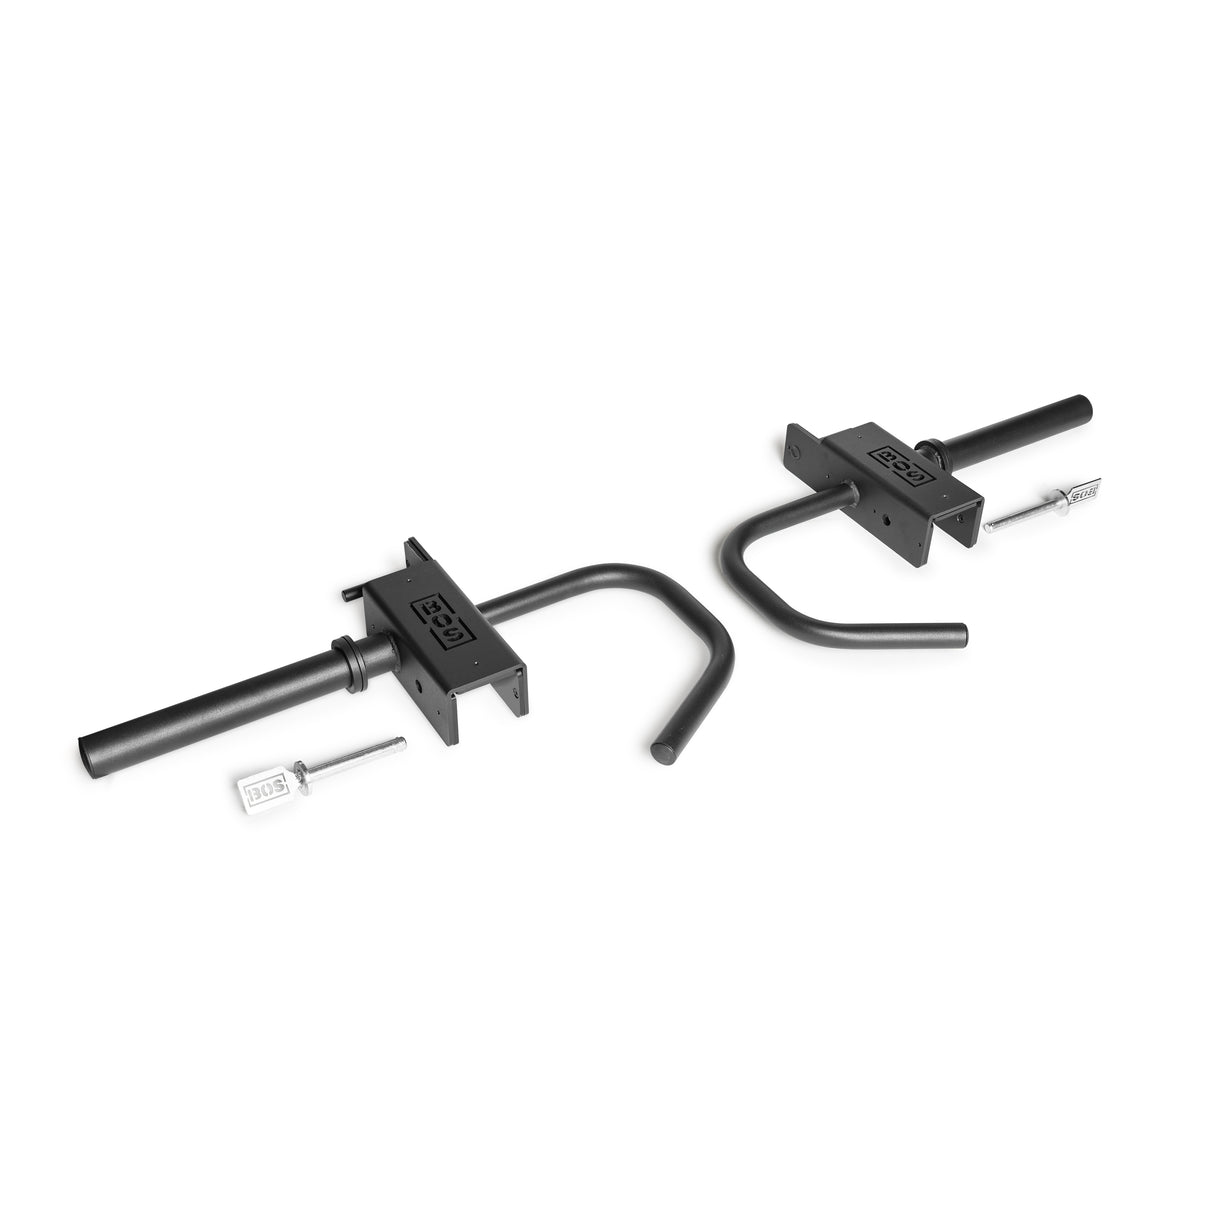 Lever Arms Rack Attachment